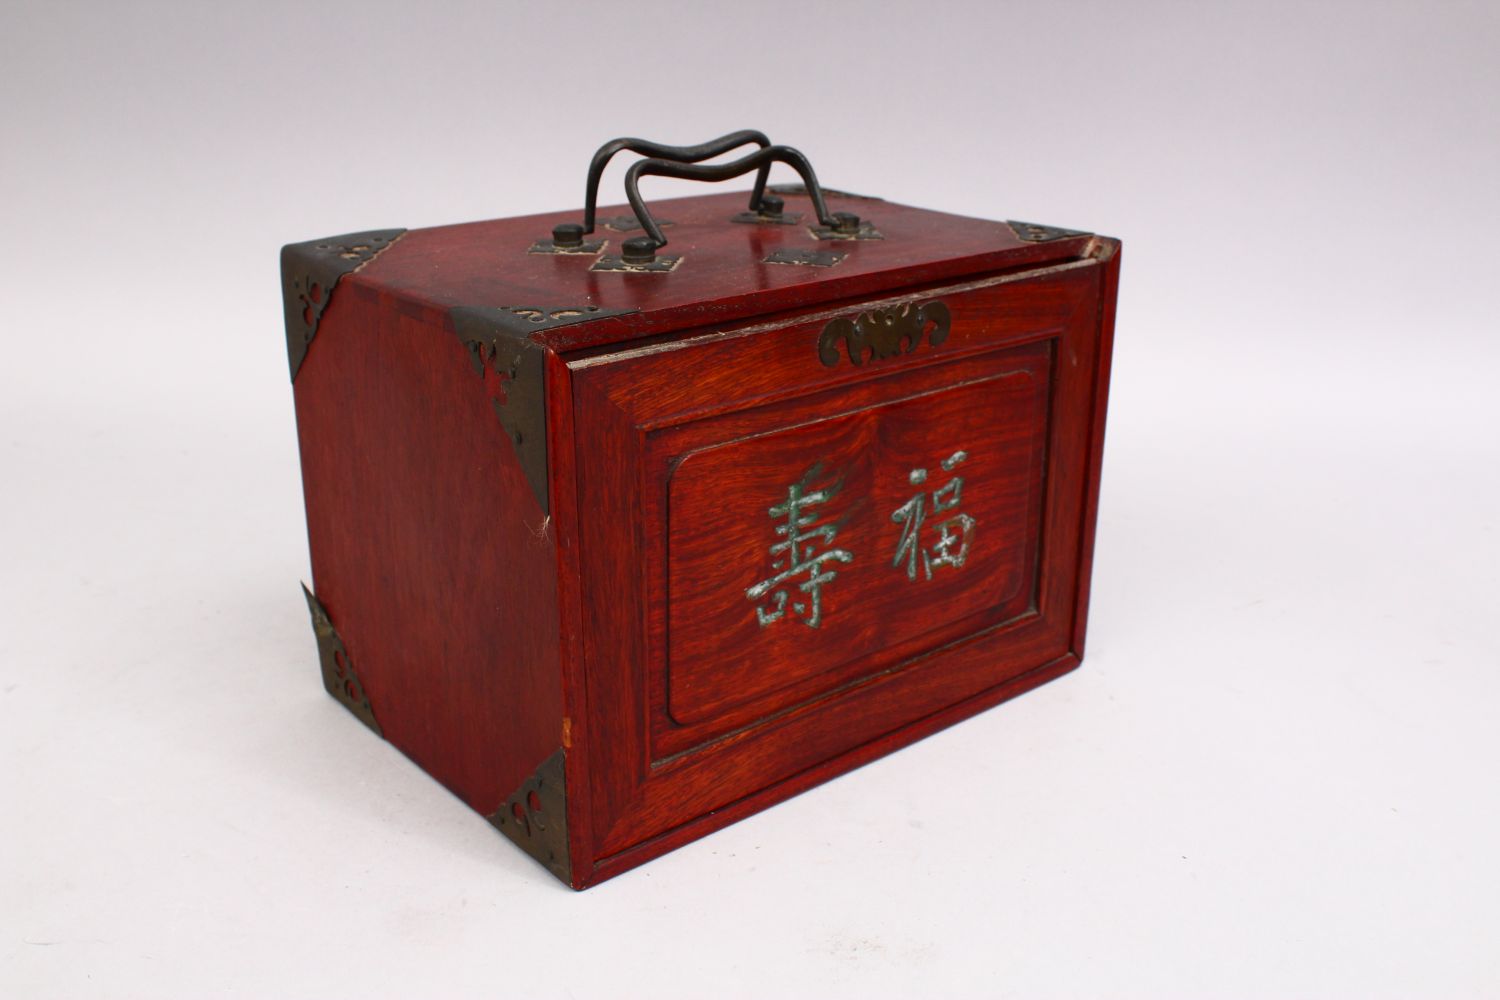 A GOOD CHINESE WOODEN BOXED MAHJONG GAMES SET, with carved symbols to the front and with 5 drawers - Image 3 of 3